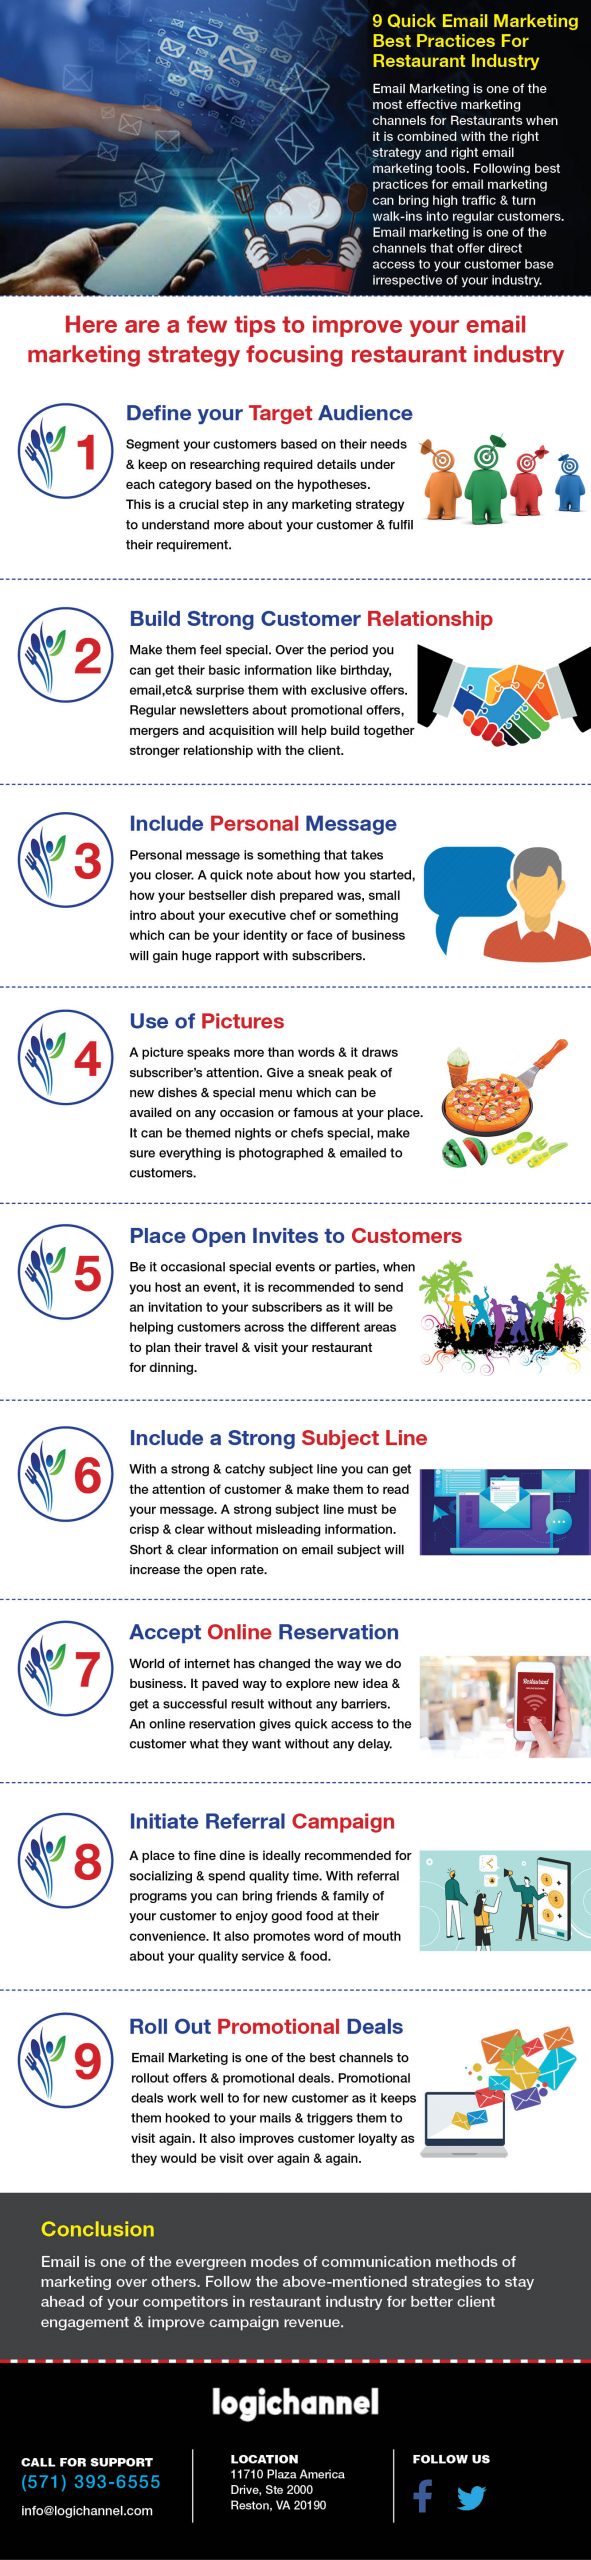 9 Quick Email Marketing Best Practices For Restaurant Industry | LogiChannel 